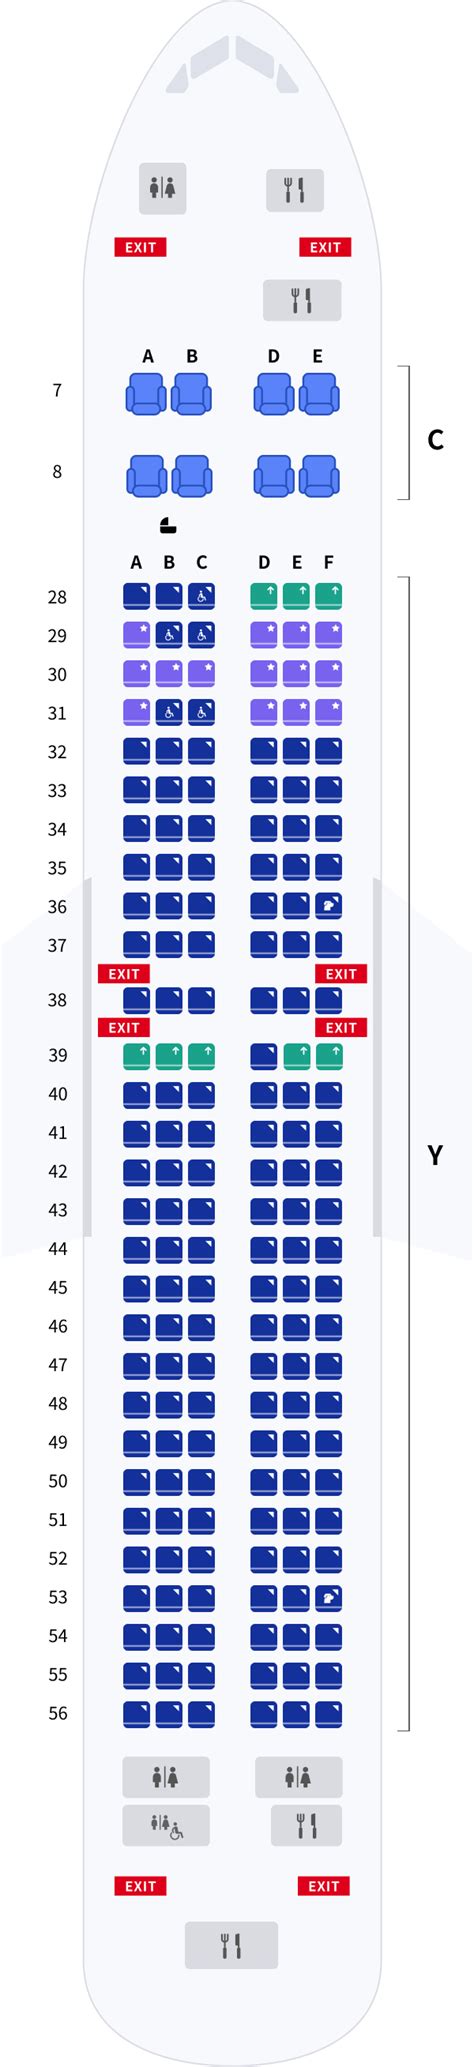 Seat map of the Airbus A321neo for you to downloa